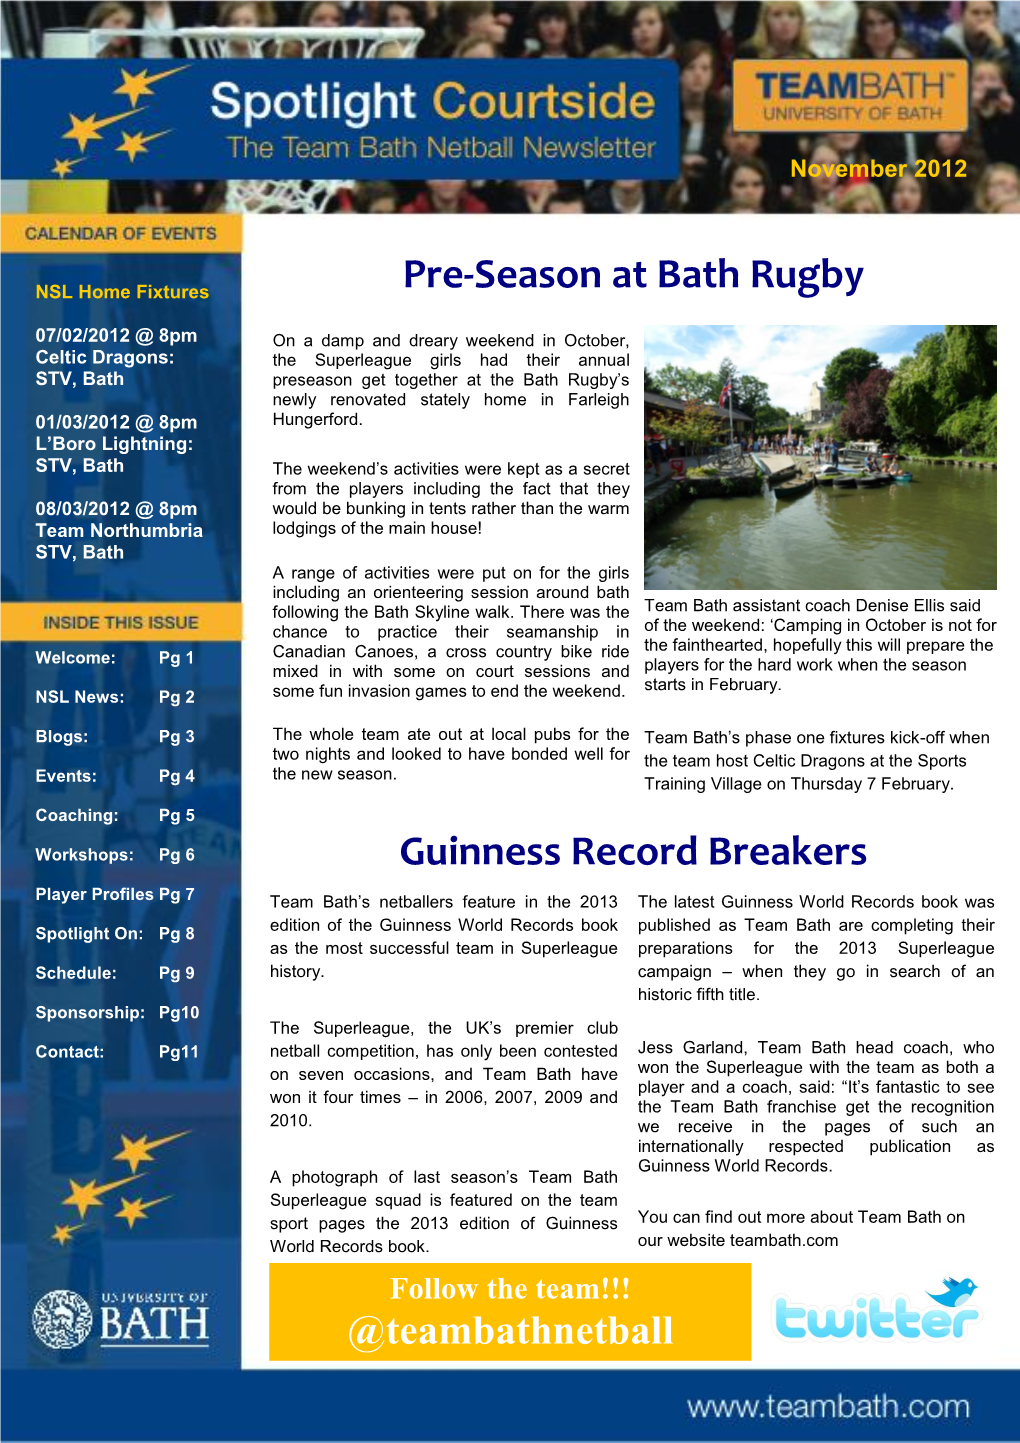 Pre-Season at Bath Rugby Guinness Record Breakers @Teambathnetball